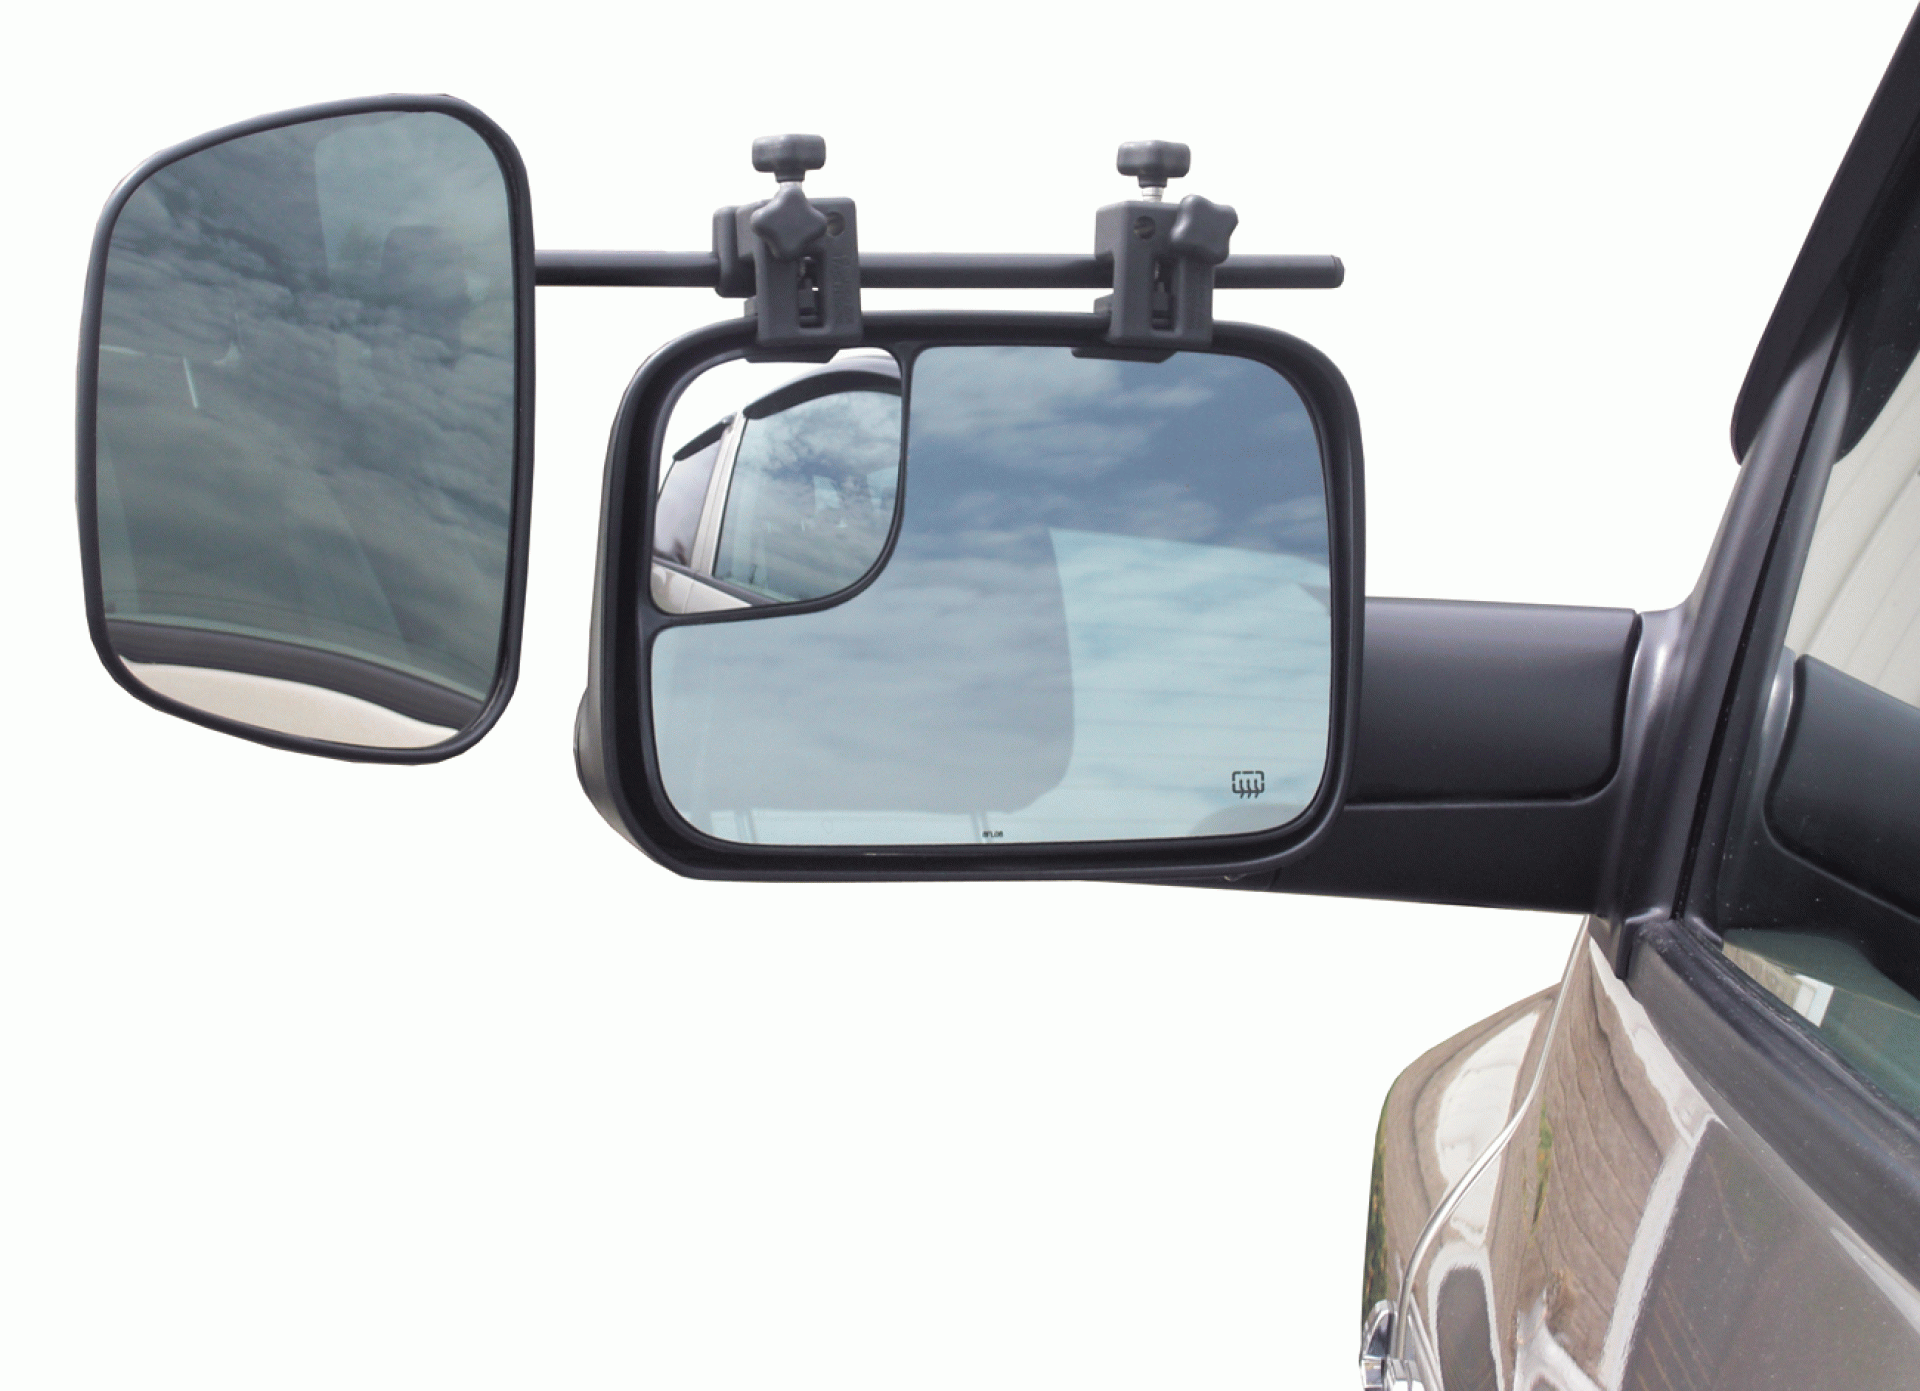 J R PRODUCTS | 2912 | GRAND AERO TOWING MIRROR CLAMP ON PAIR - Convex Glass